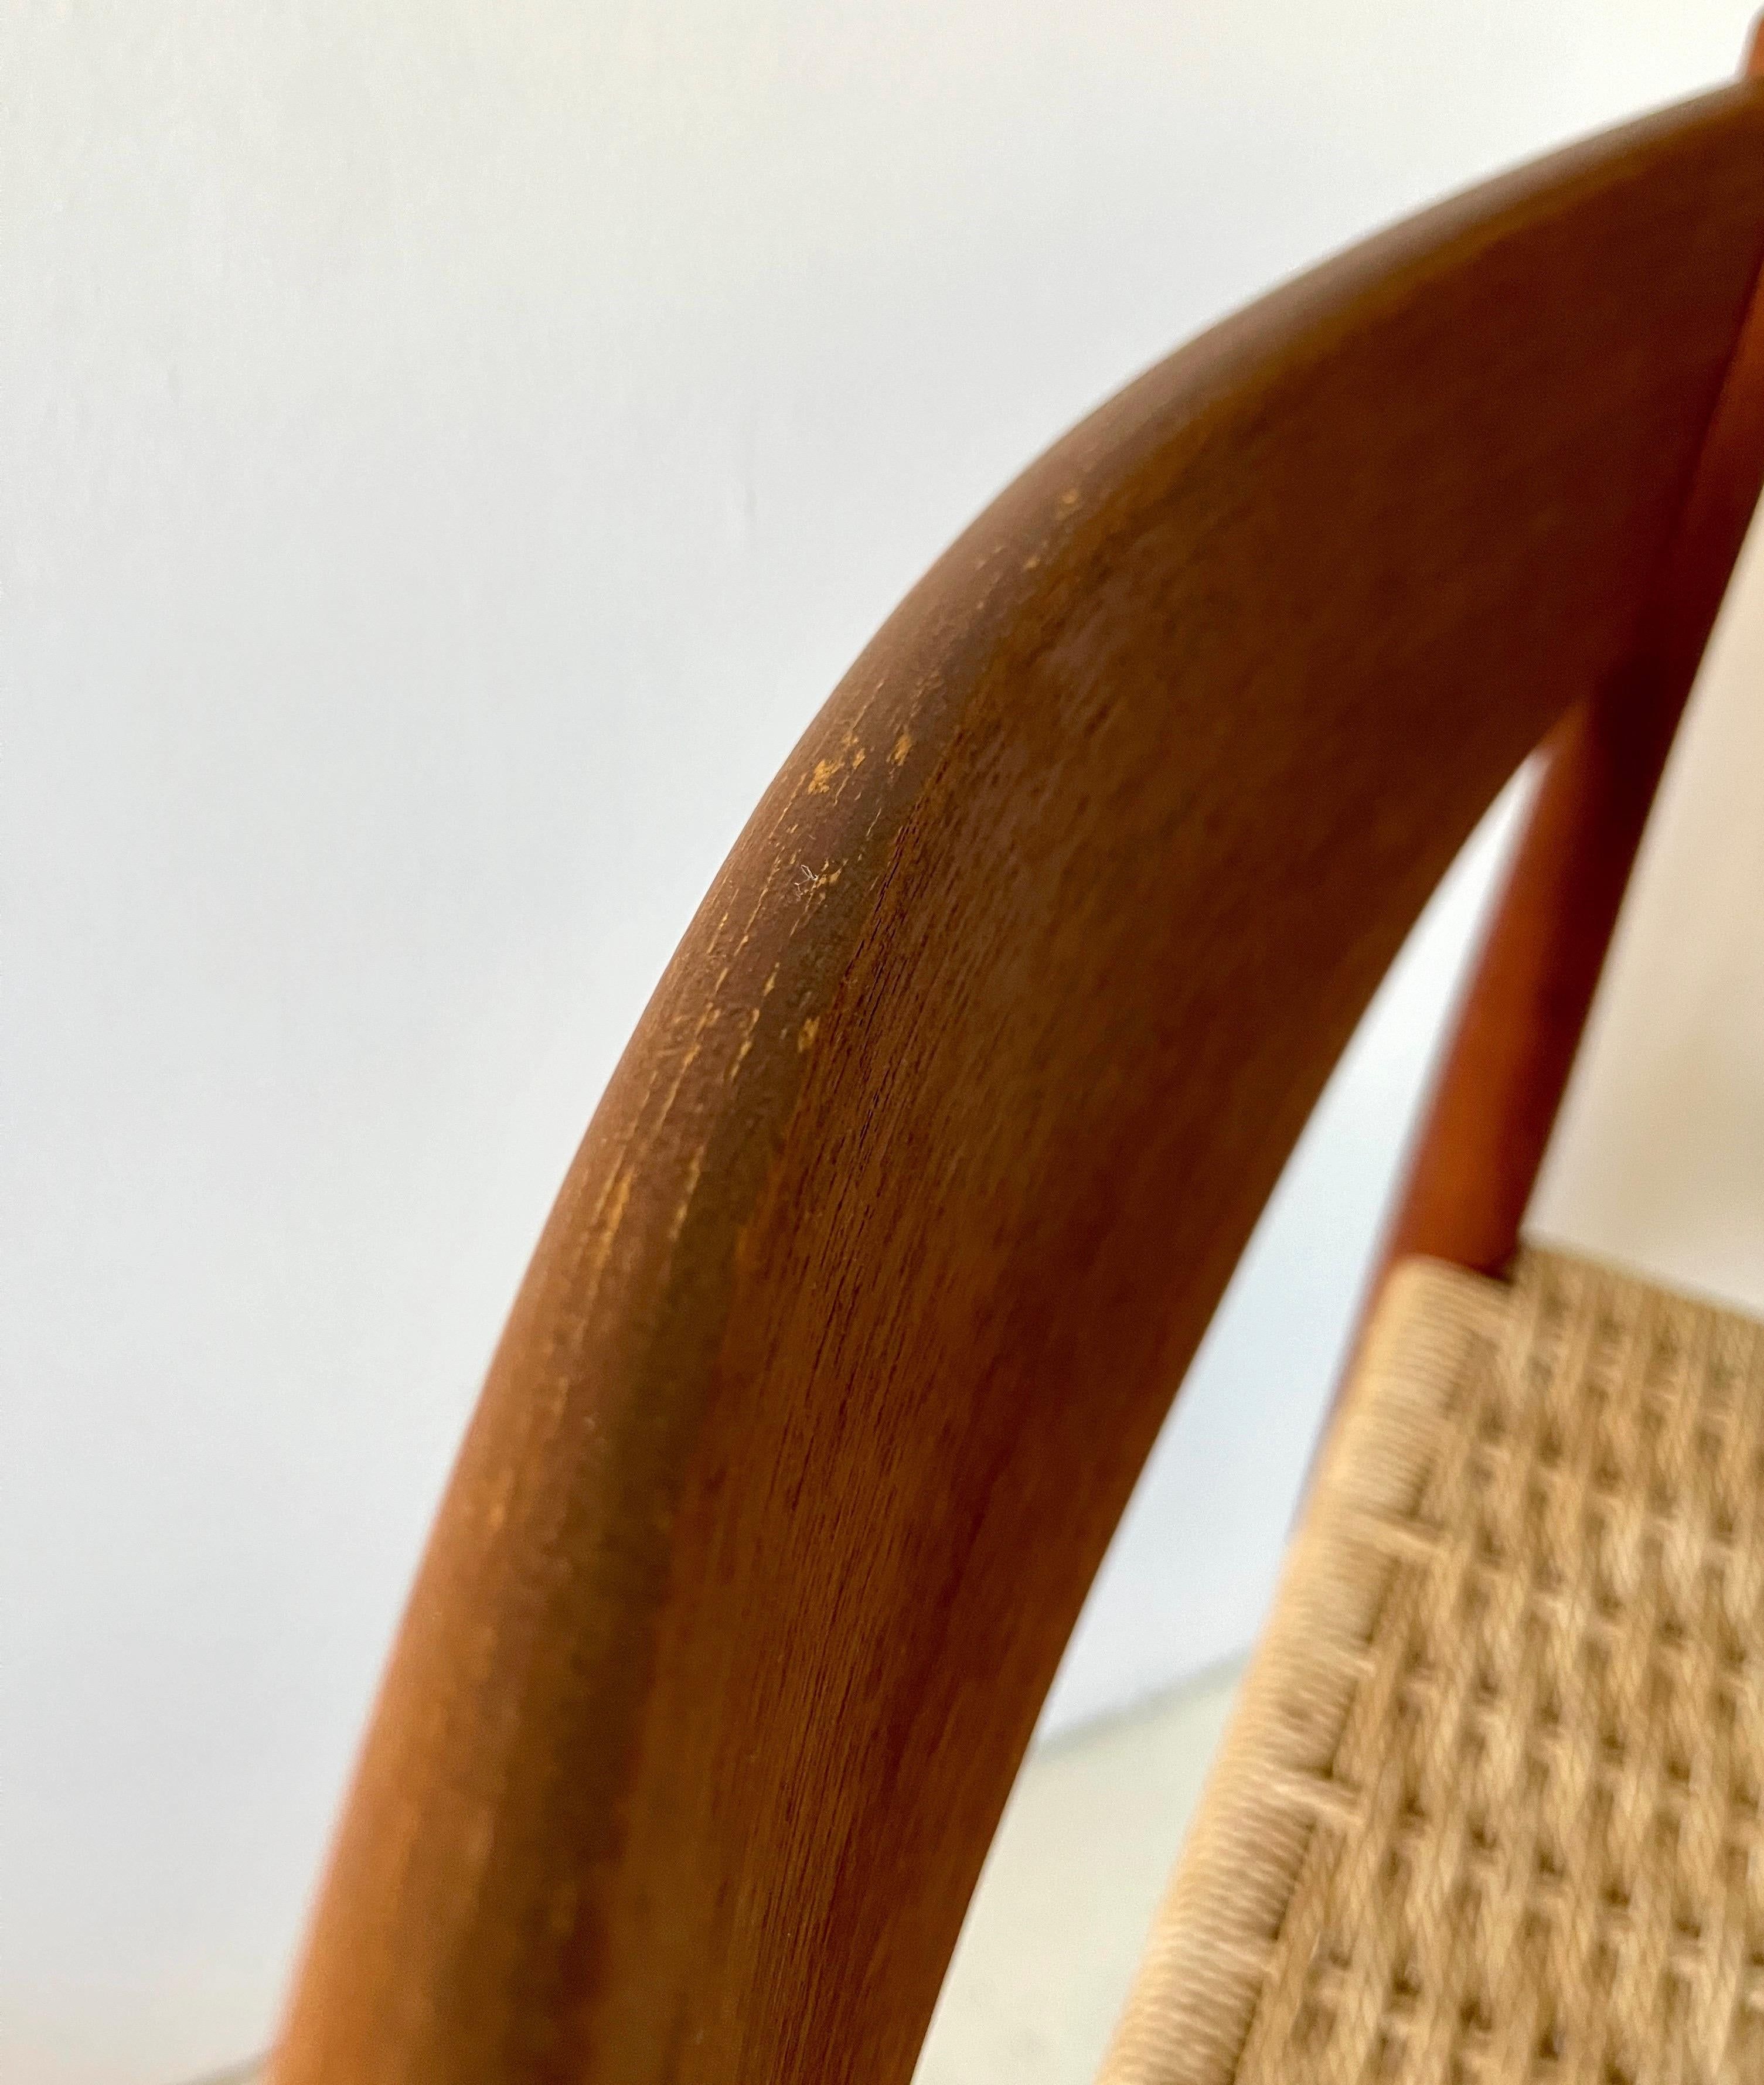 Teak Danish Modern Dining Chair by Poul Volther for Frem Røjle  For Sale 5